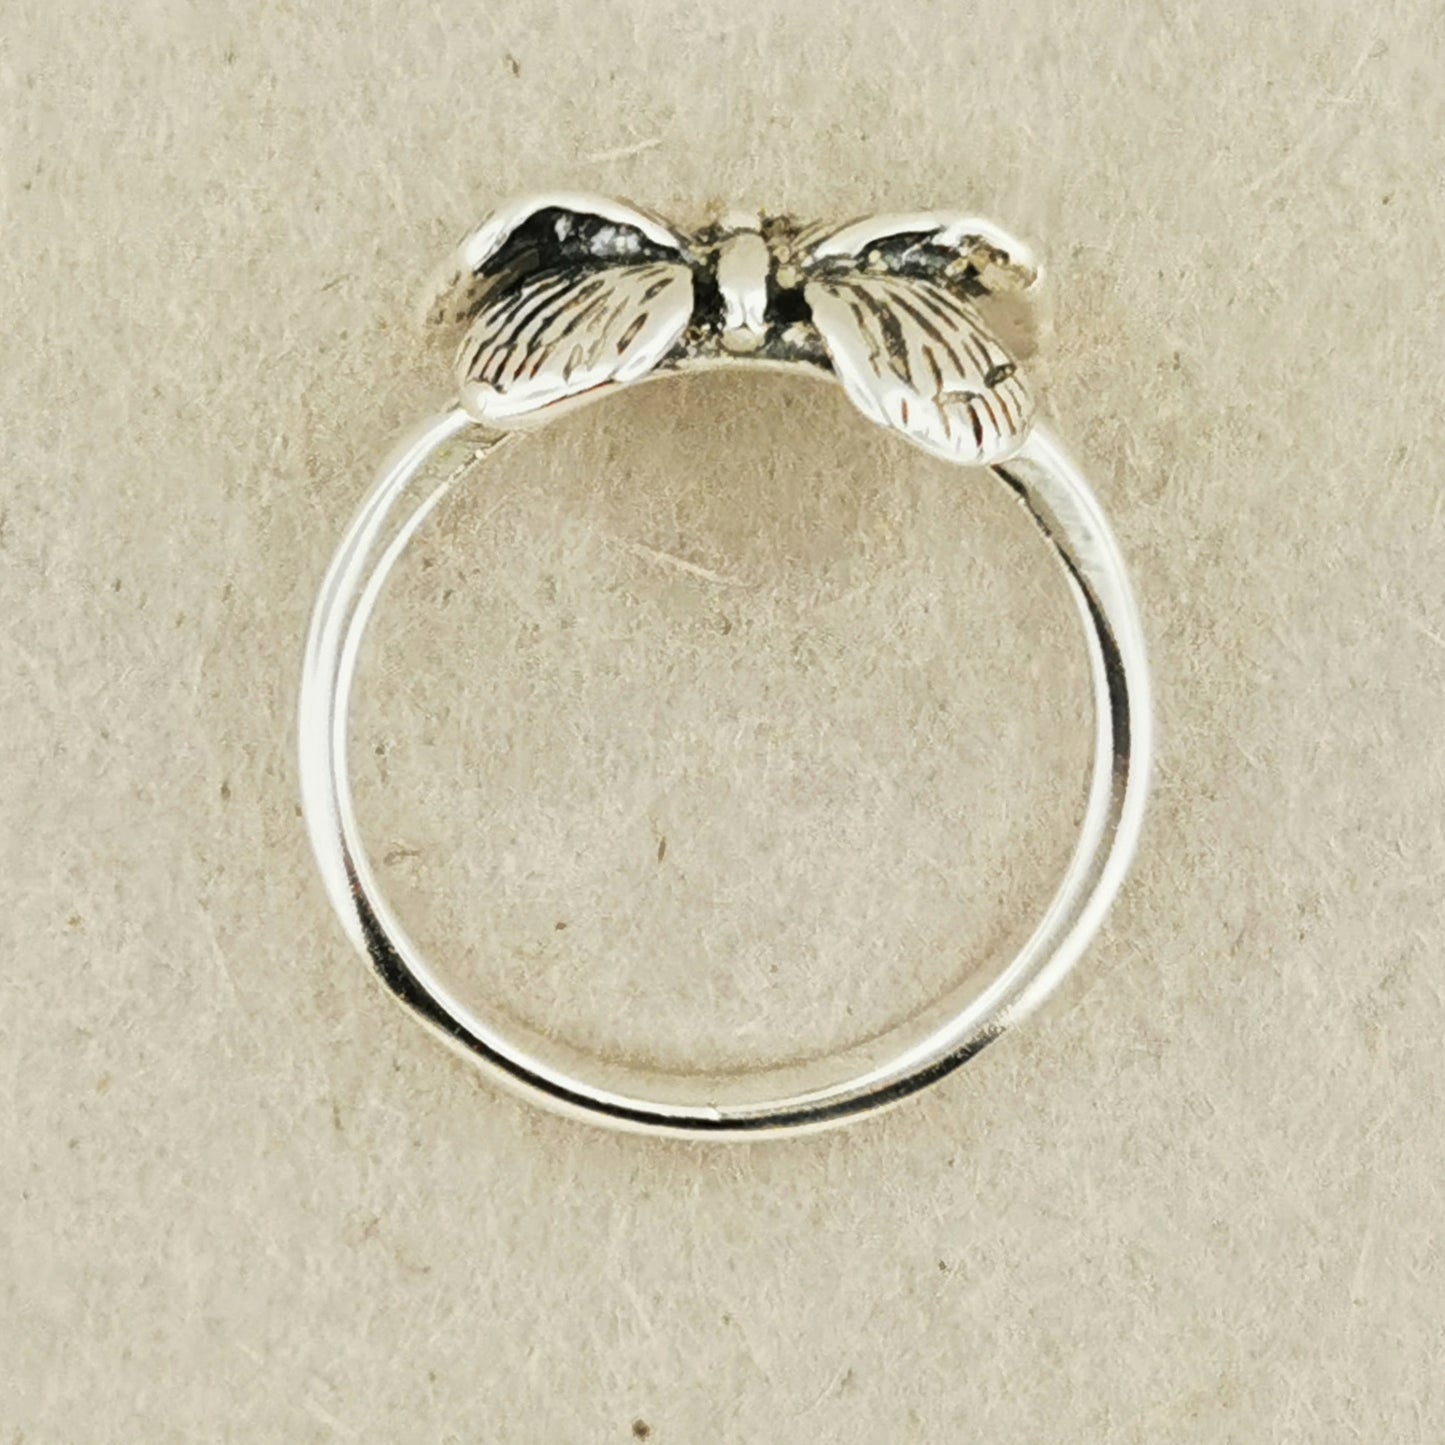 butterfly ring in sterling silver, silver butterfly ring, sterling silver butterfly ring, silver butterfly jewelry, silver butterfly jewellery, butterfly ring, butterfly jewelry, butterfly jewellery, mariposa ring, silver mariposa ring, free spirit ring, gift for girlfriend, gift for daughter, silver everyday ring, silver insect ring, butterfly lover jewelry, butterfly lover jewellery, butterfly ring gift